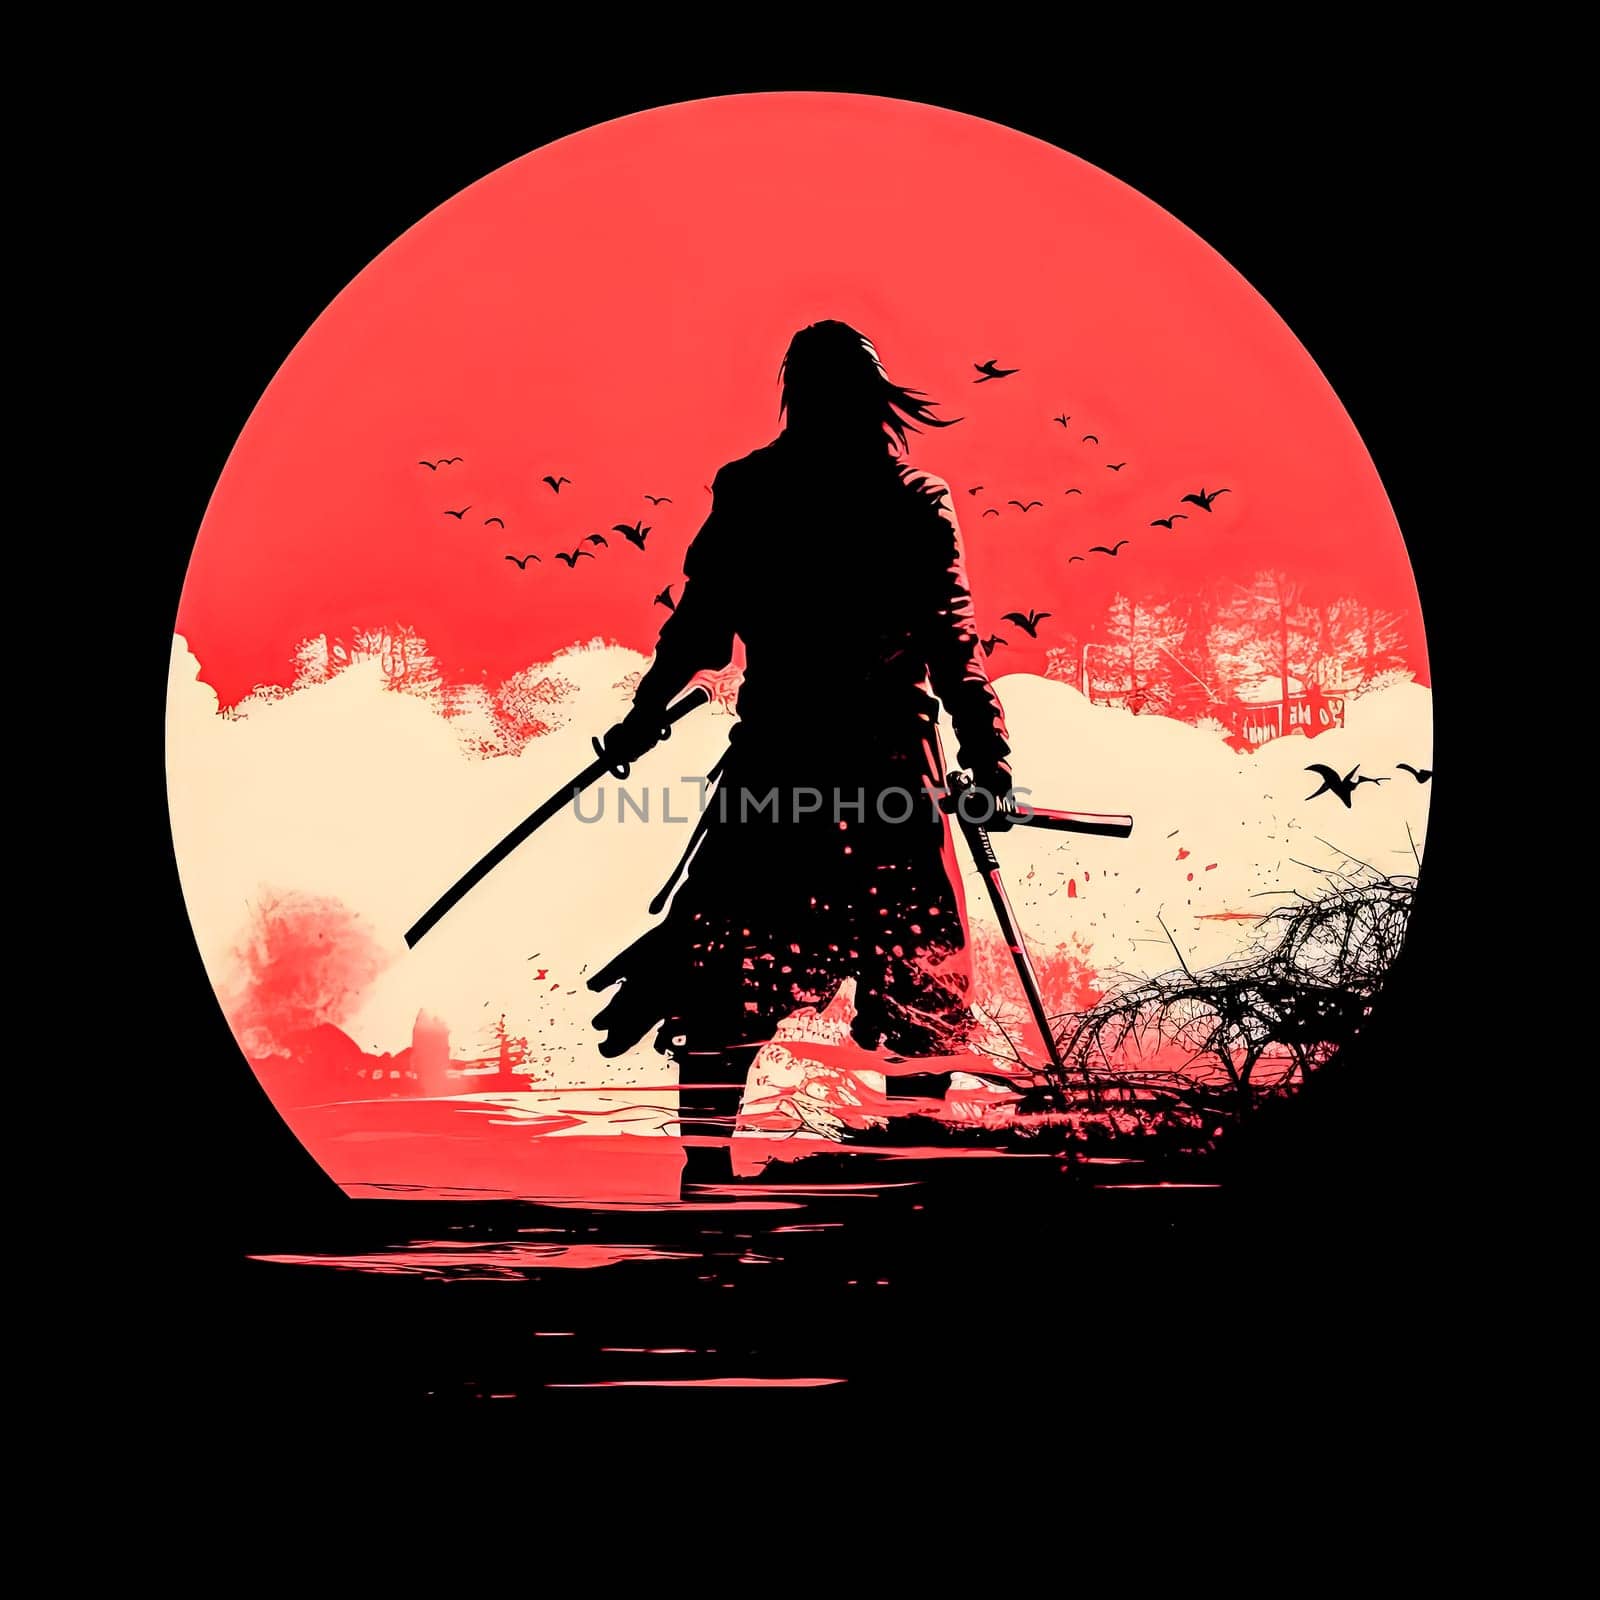 A man stands in front of a red moon. The man is holding a sword and he is a warrior. The image has a dark and mysterious mood, with the red moon and the man's silhouette creating a sense of danger